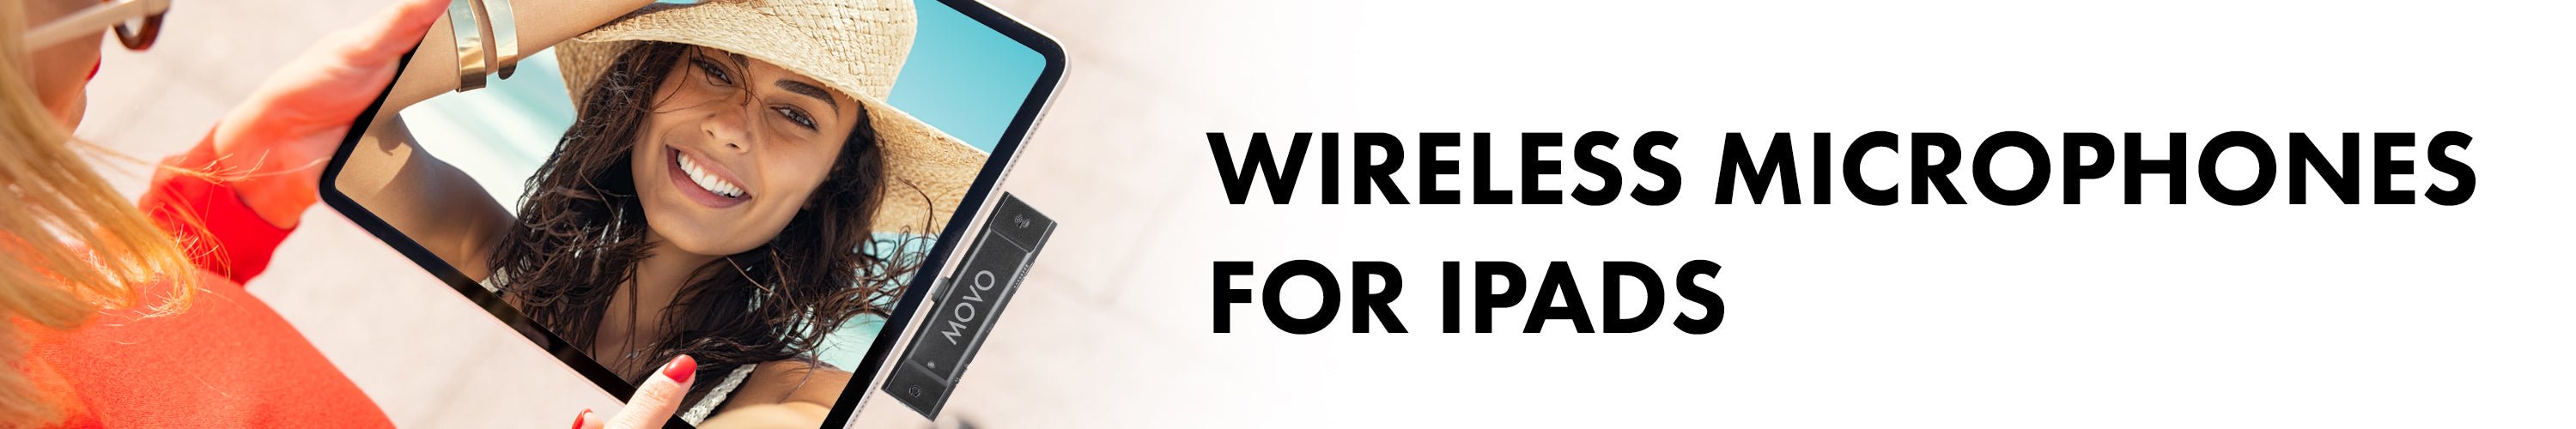 Wireless Microphones for iPads - Movo